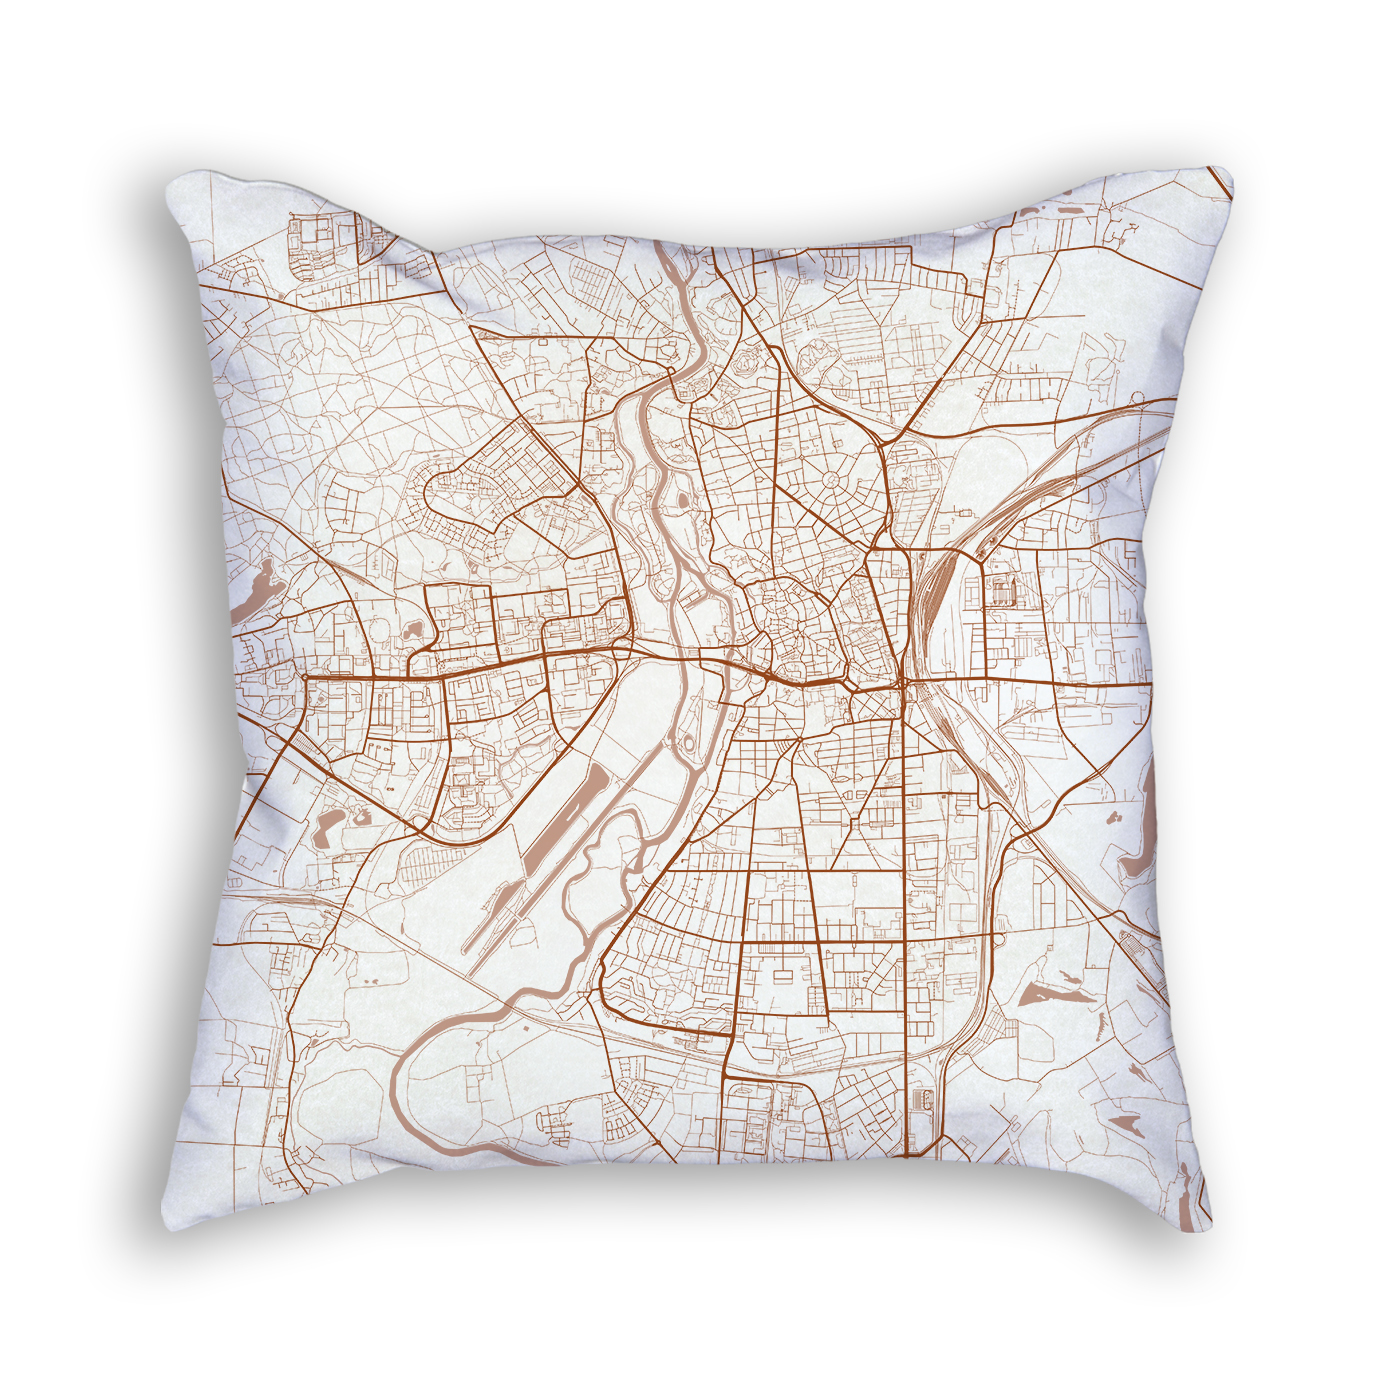 Halle Germany City Map Art Decorative Throw Pillow